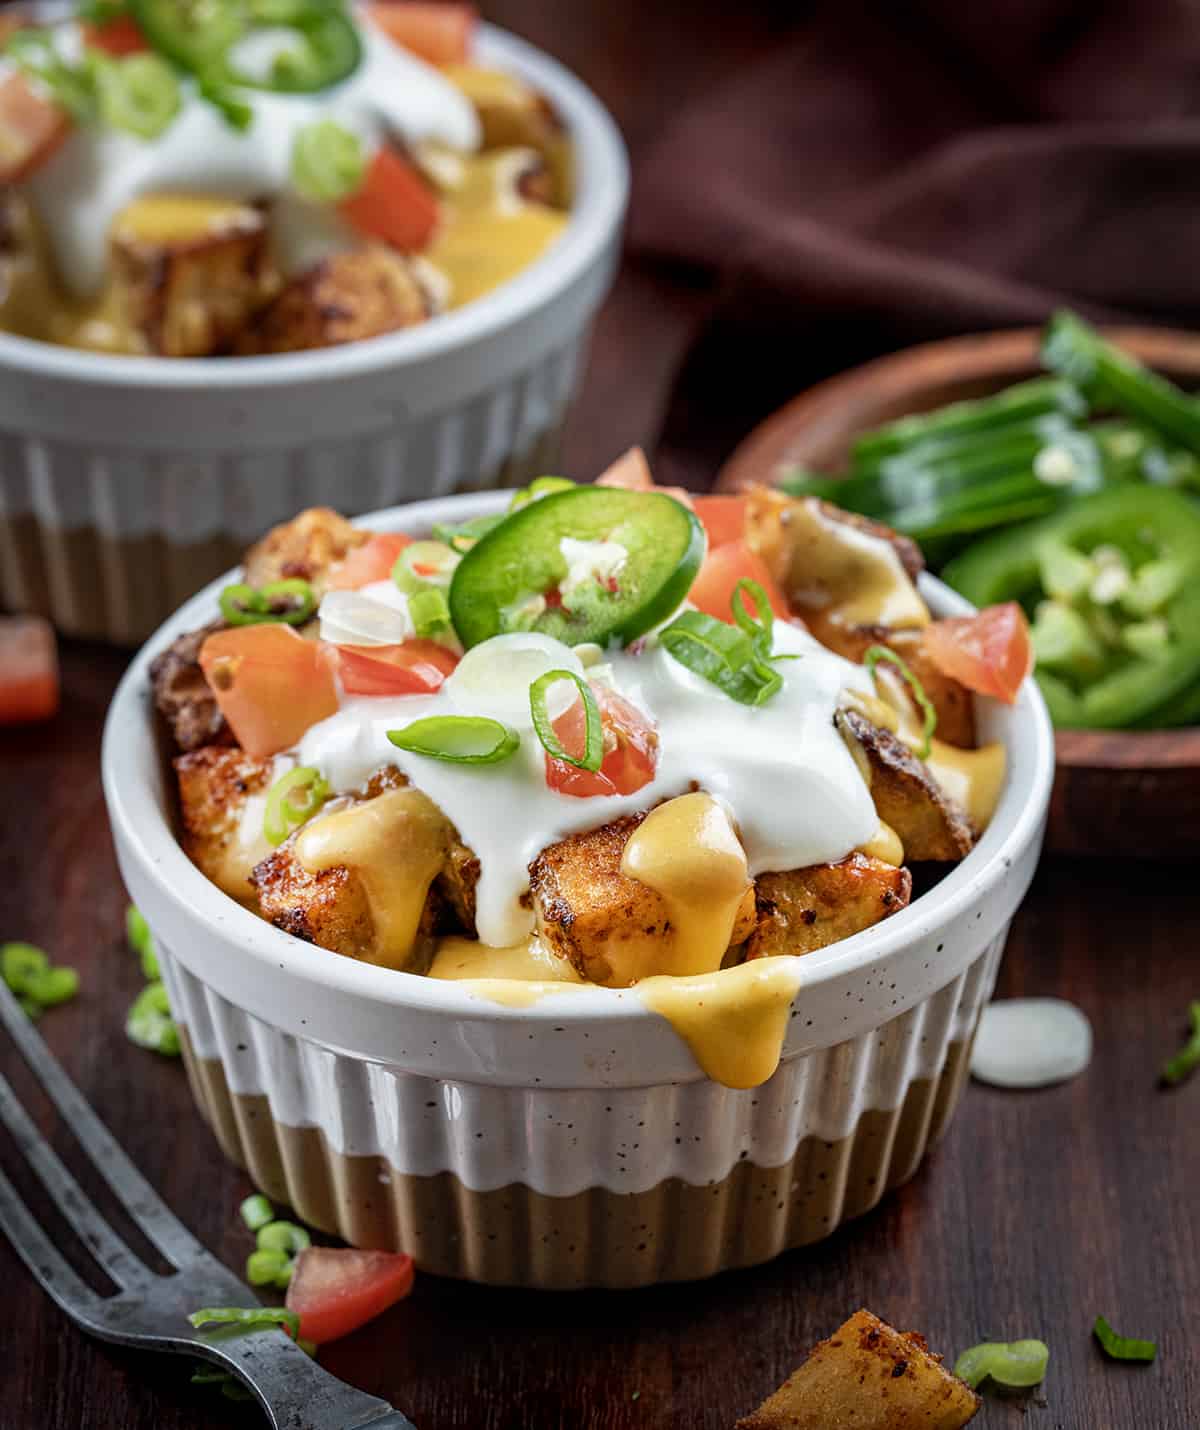 Bowls of Cheesy Fiesta Potatoes on a Dark Cutting Board with Jalapeno and Forks. 